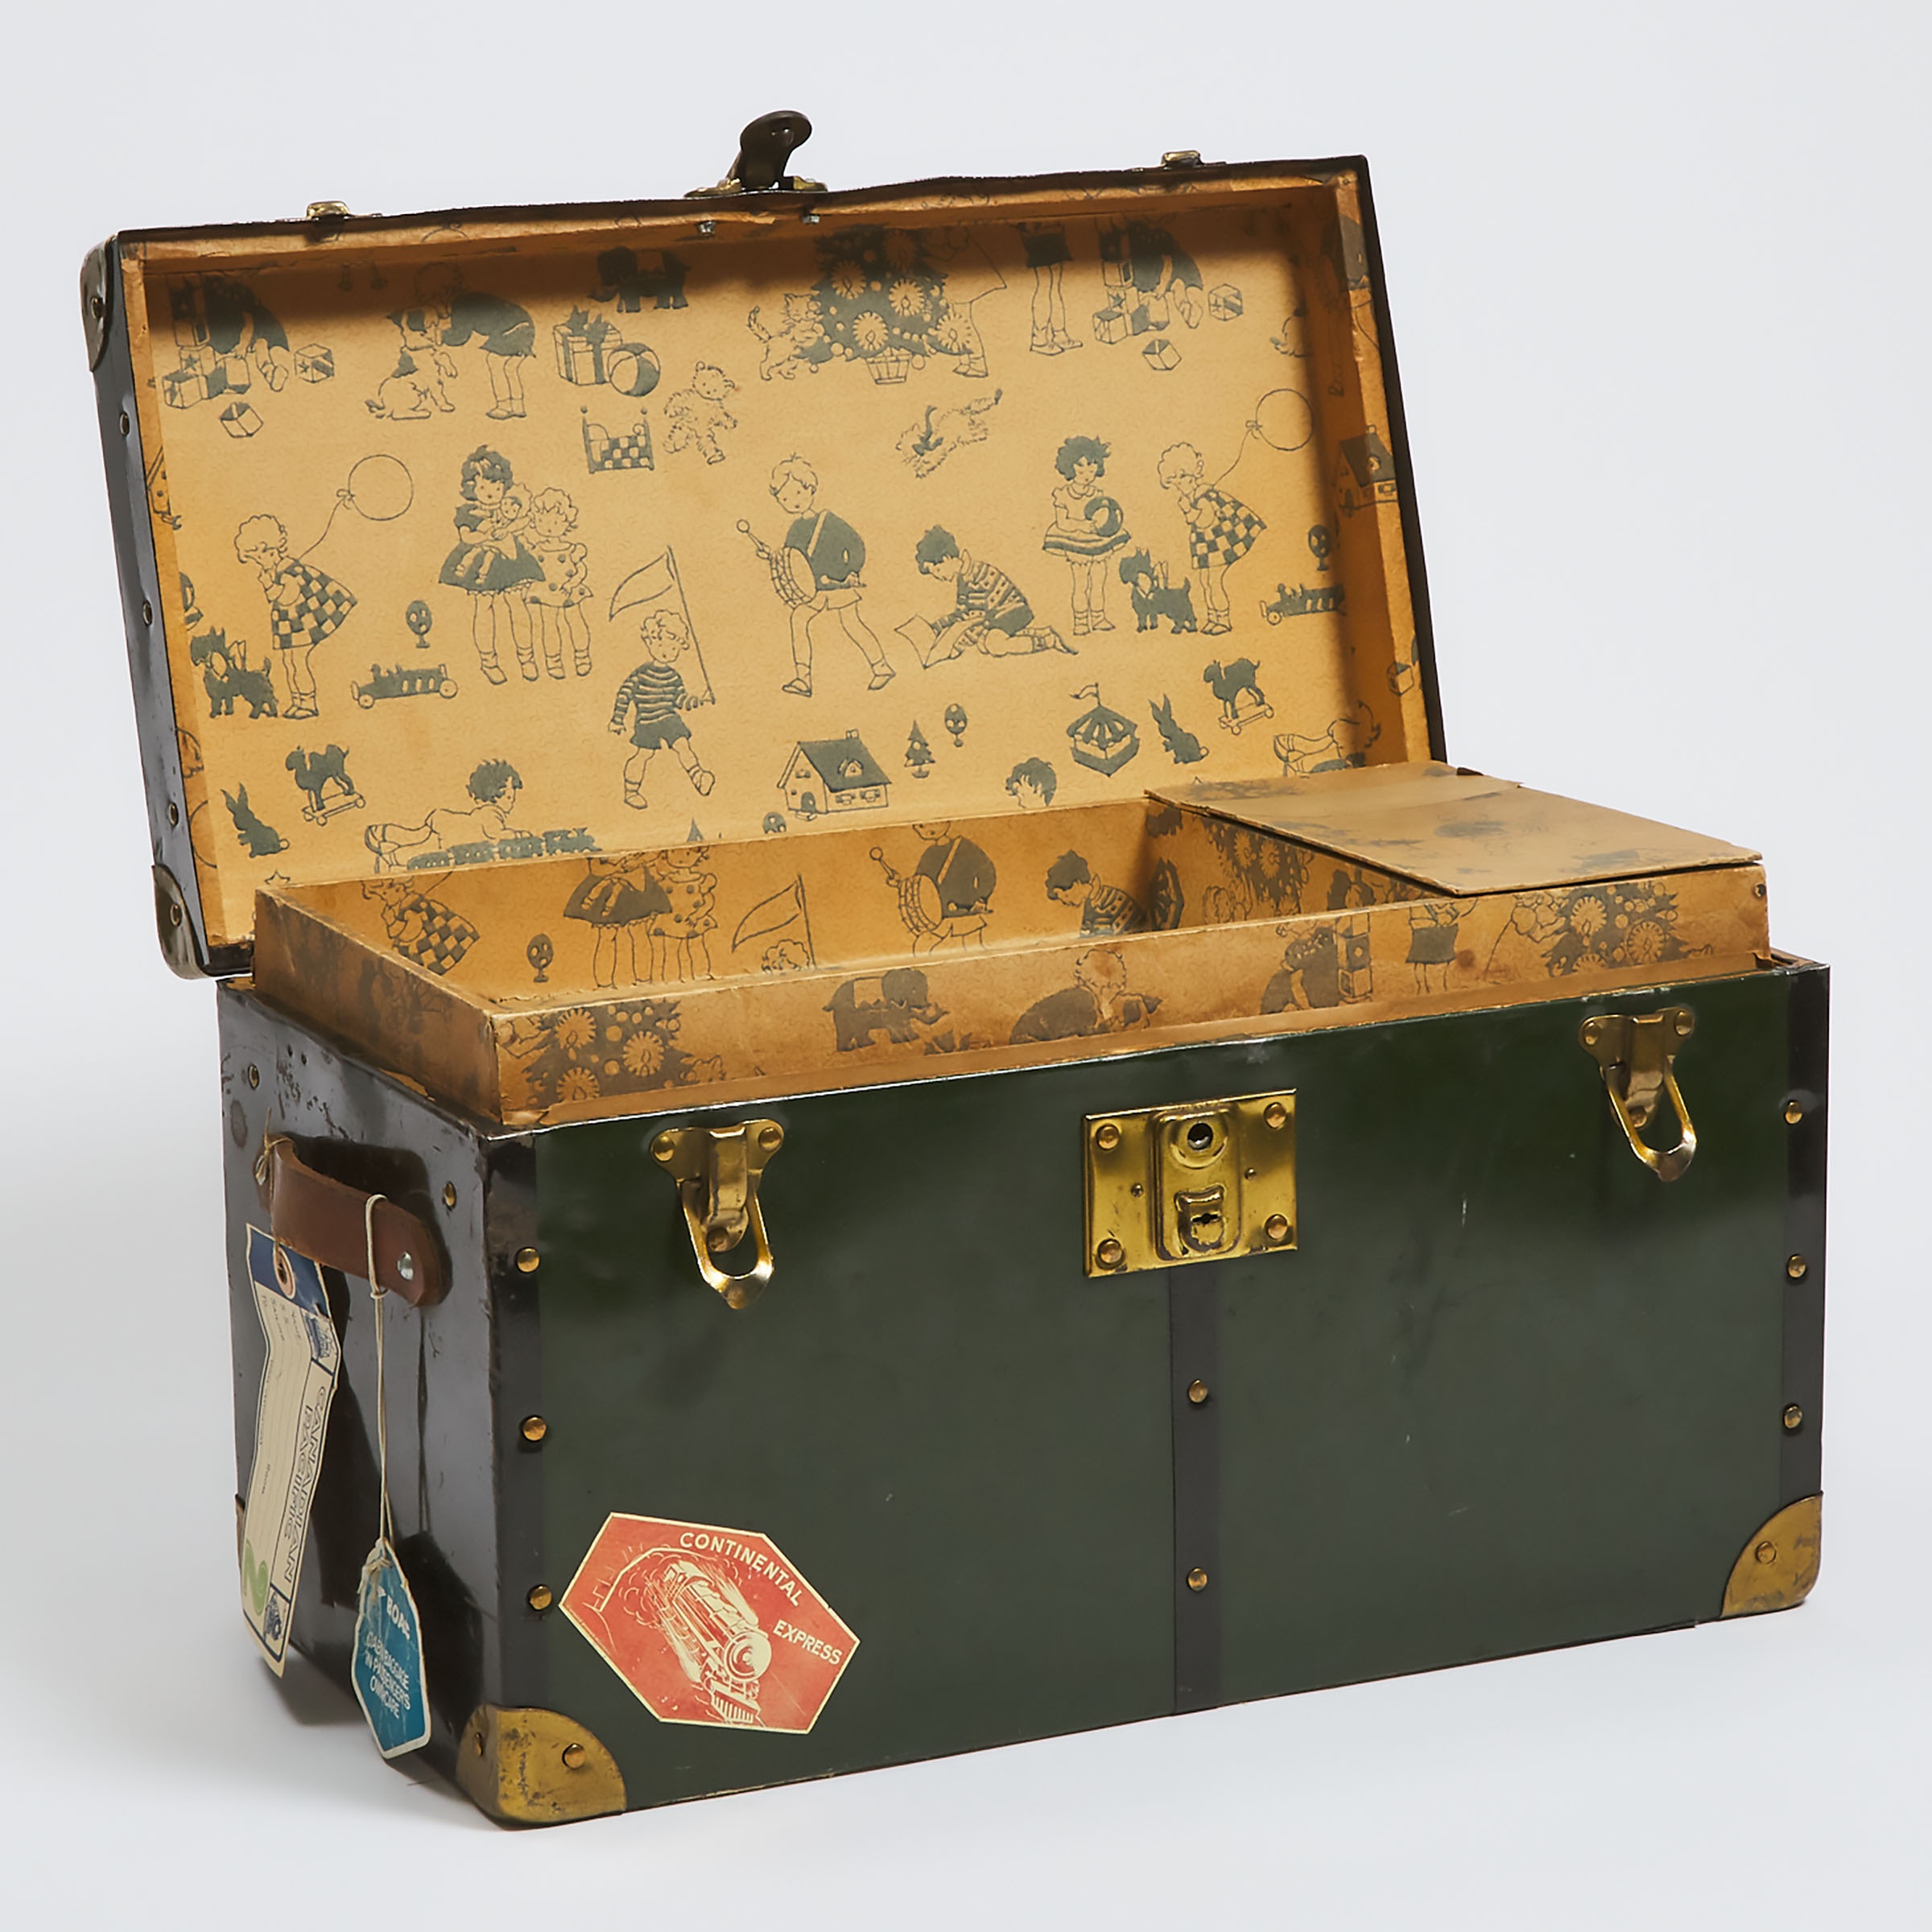 American Child's Steamer Trunk, Eagle Lock Co., Terryville, Conn., c.1920